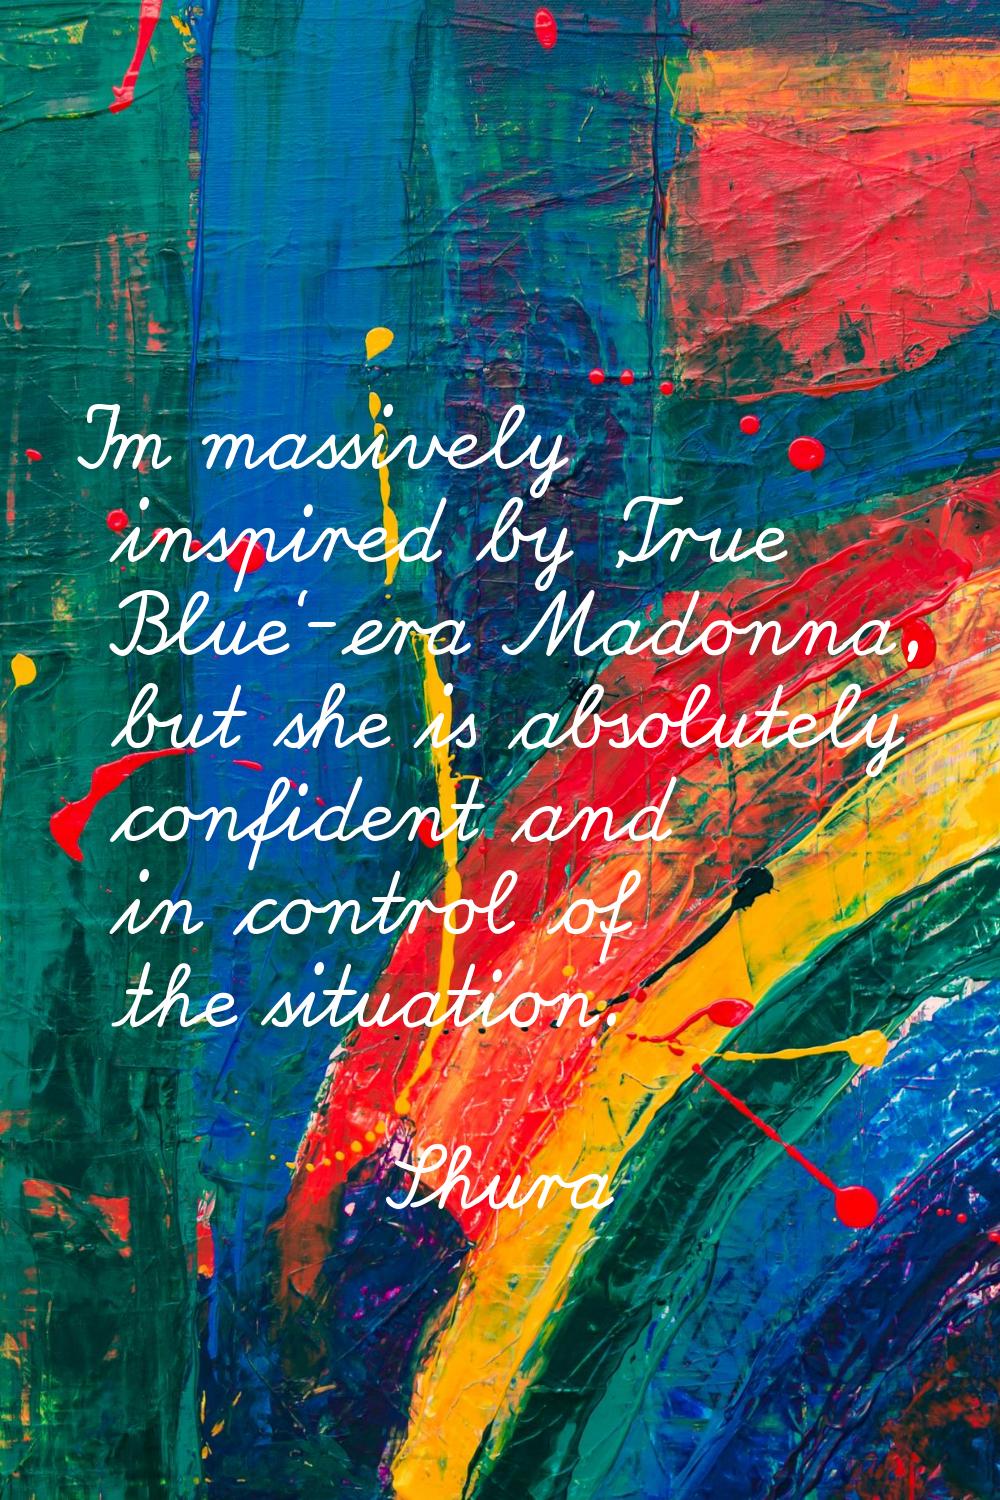 I'm massively inspired by 'True Blue'-era Madonna, but she is absolutely confident and in control o